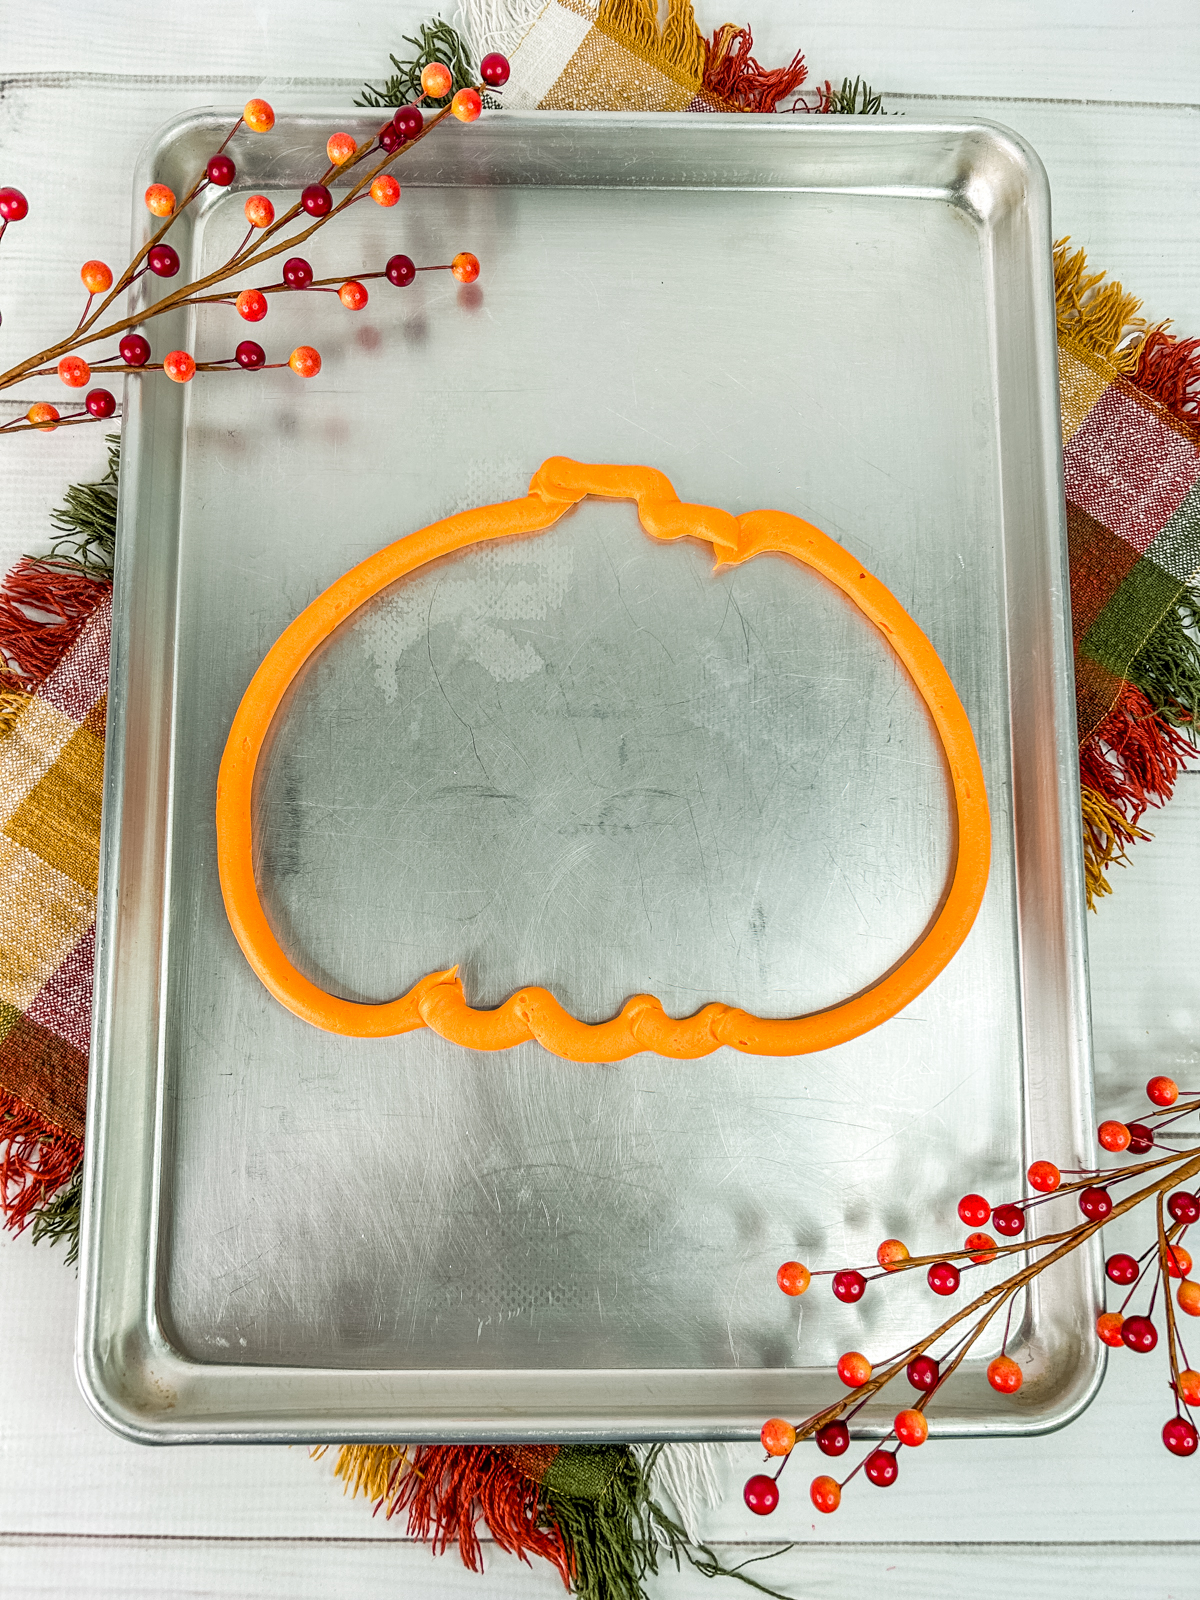 Piping frosting to create a pumpkin outline on the charcuterie board.